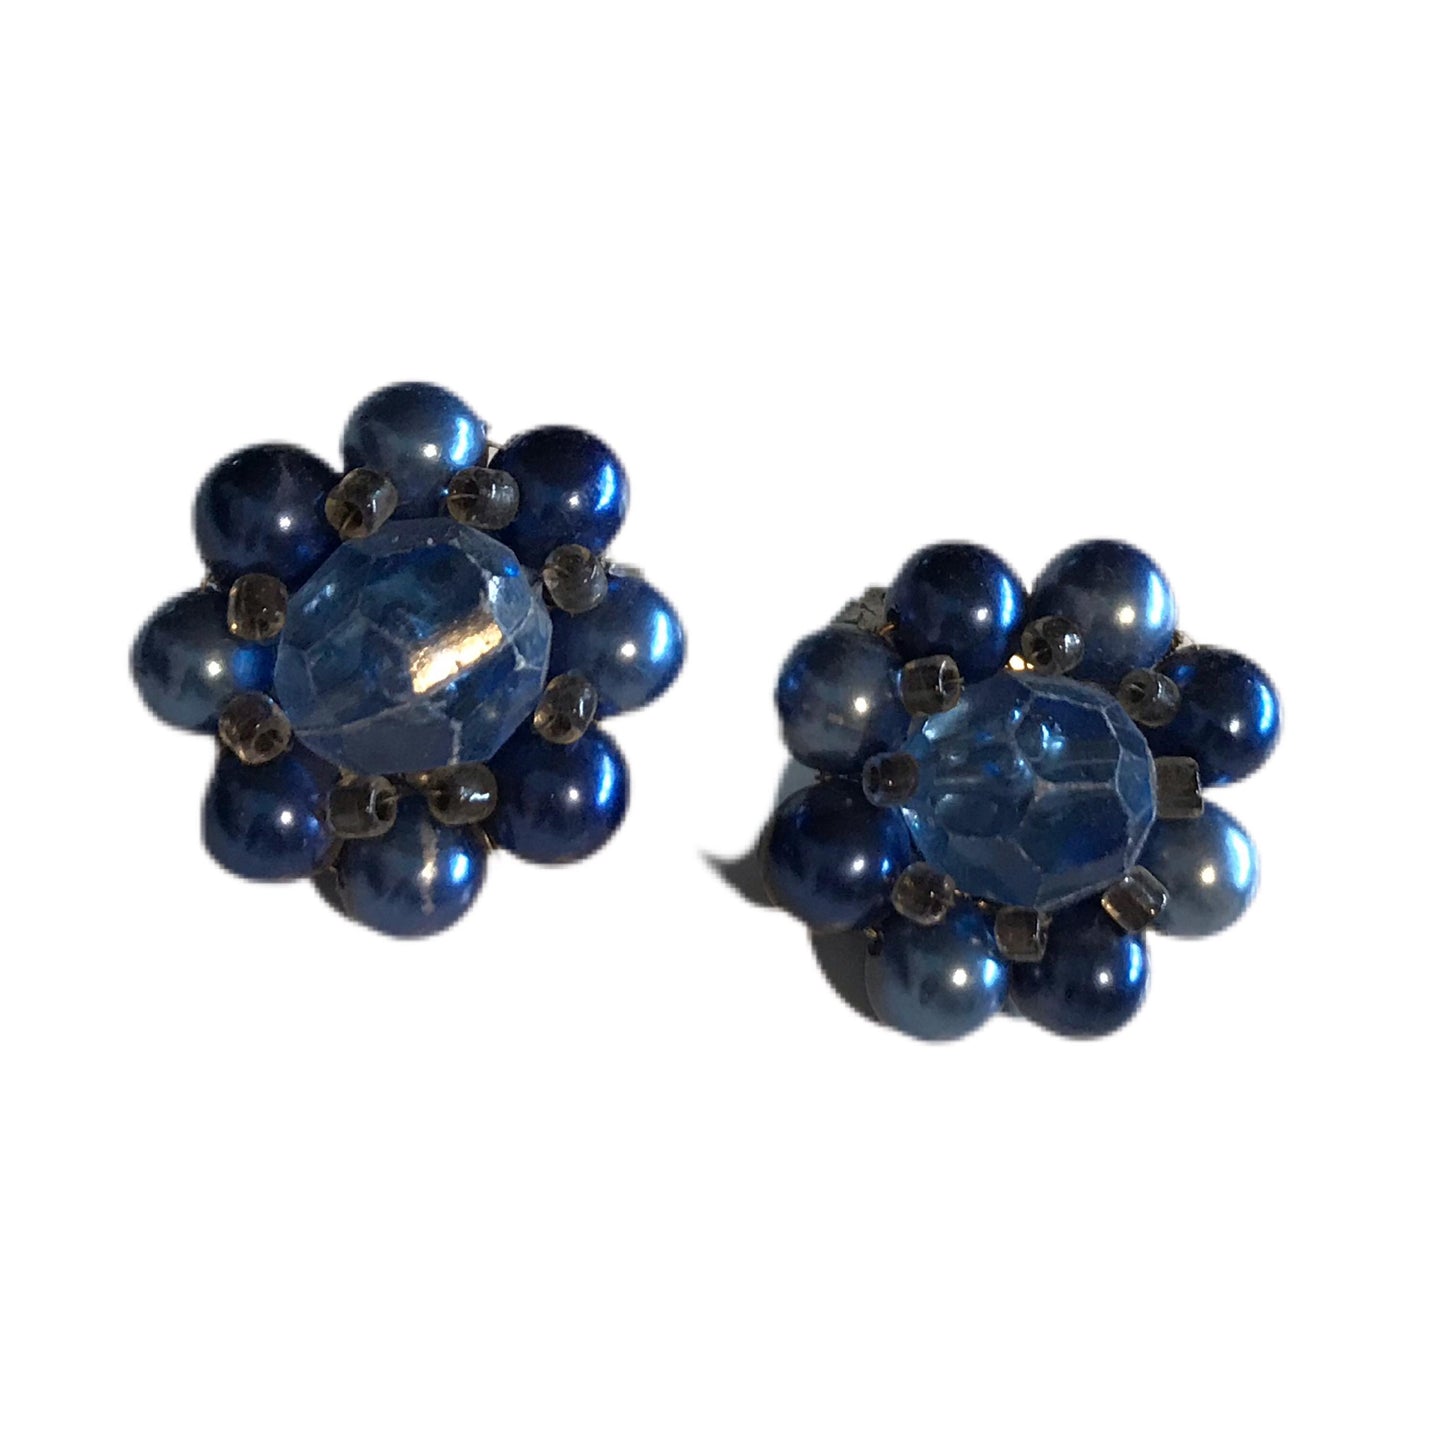 Shimmering Blue Bead Cluster Clip Earrings circa 1960s